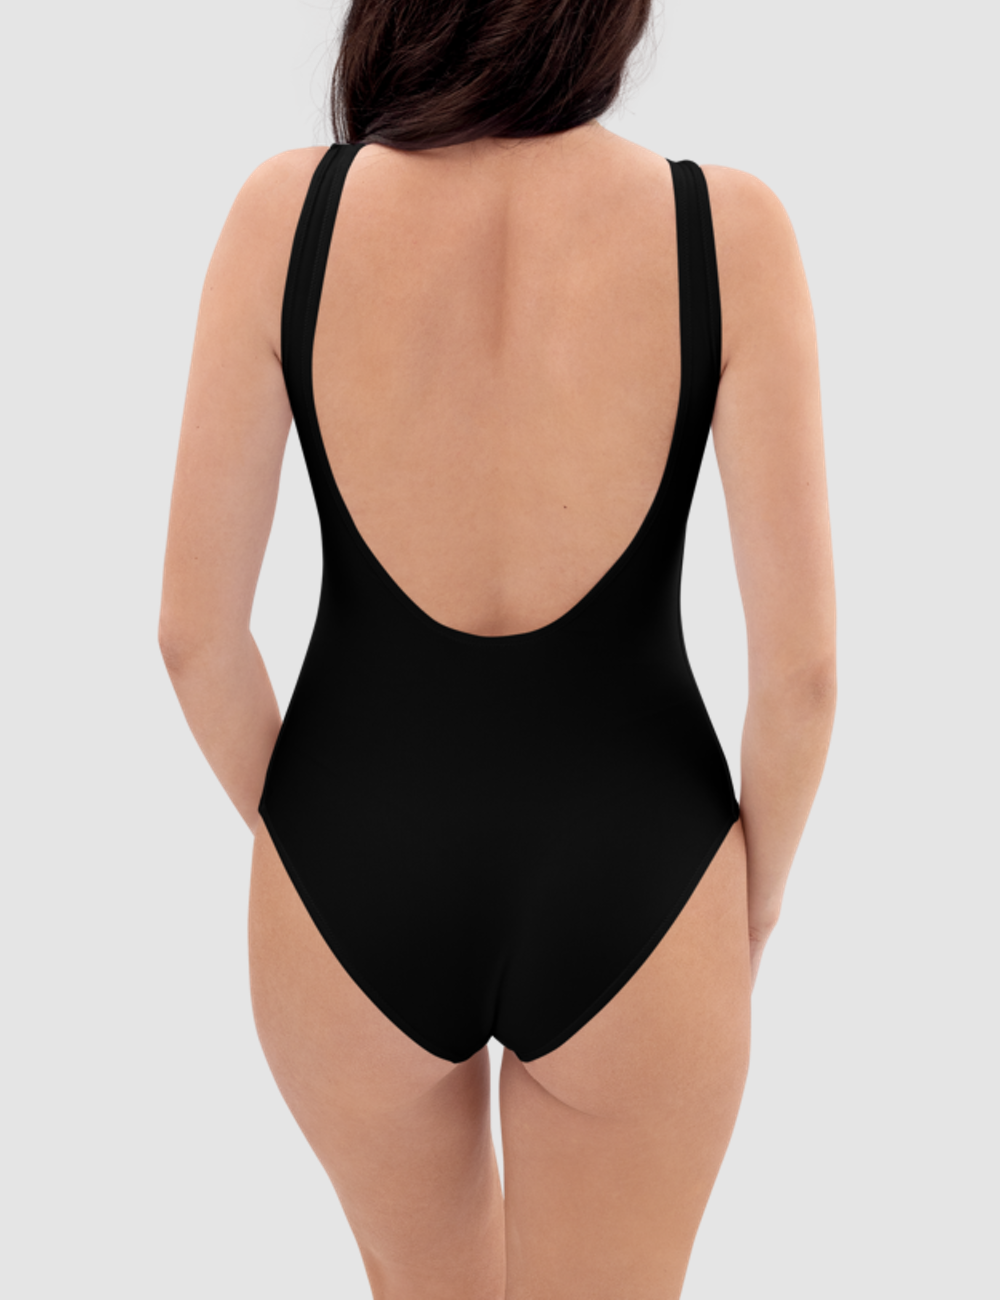 I Don't Care Babe | Women's One-Piece Swimsuit OniTakai